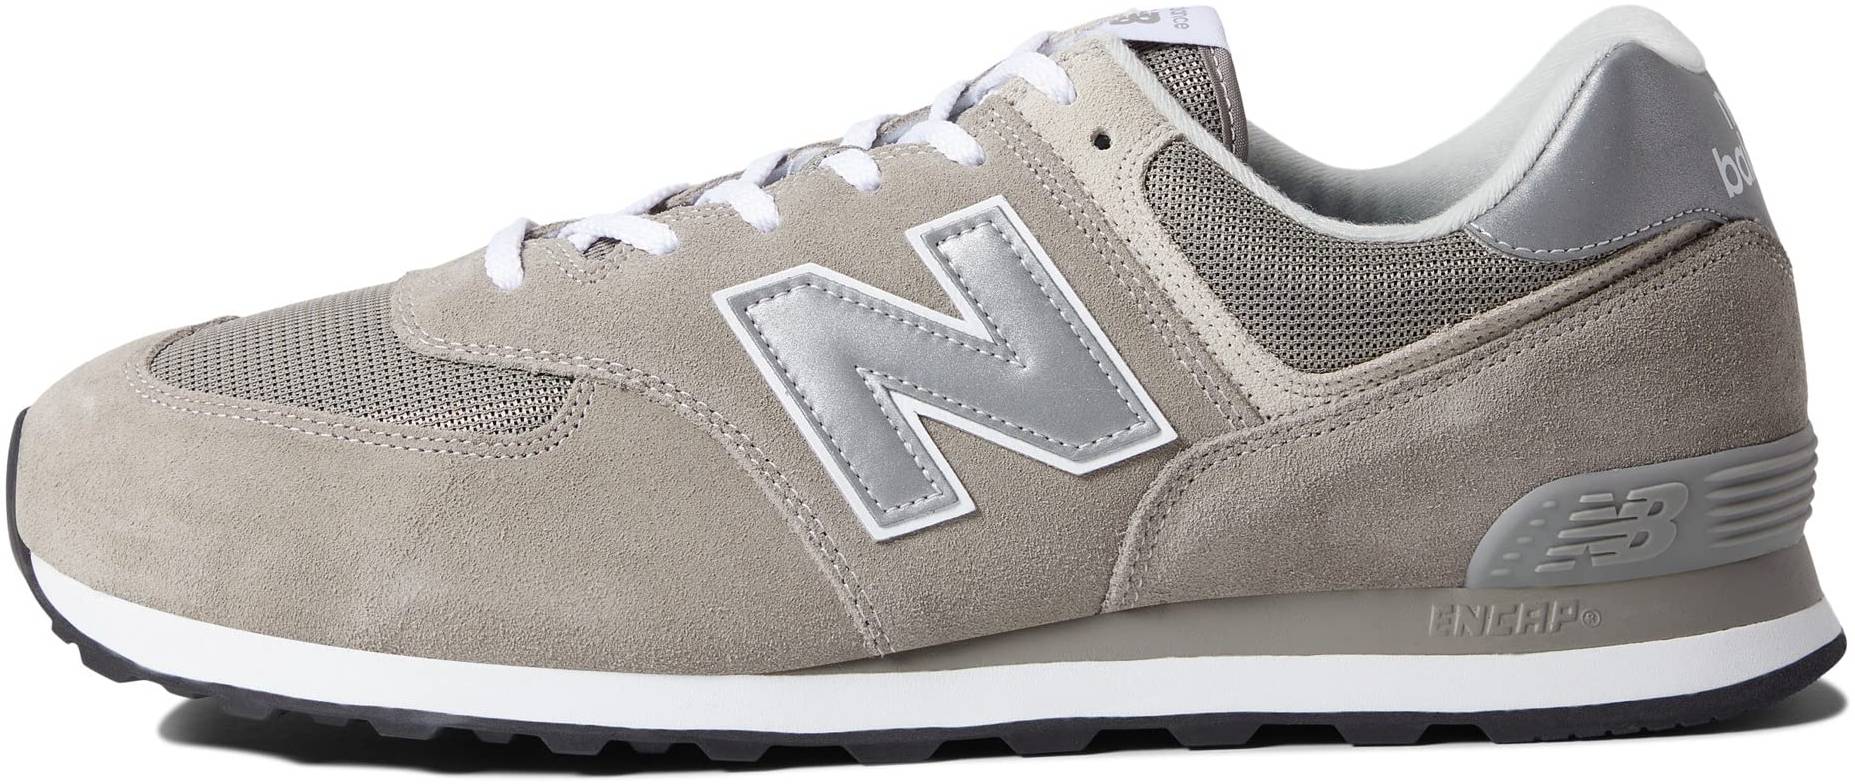 New Balance 574 Core sneakers in 6 colors (only $65) | RunRepeat